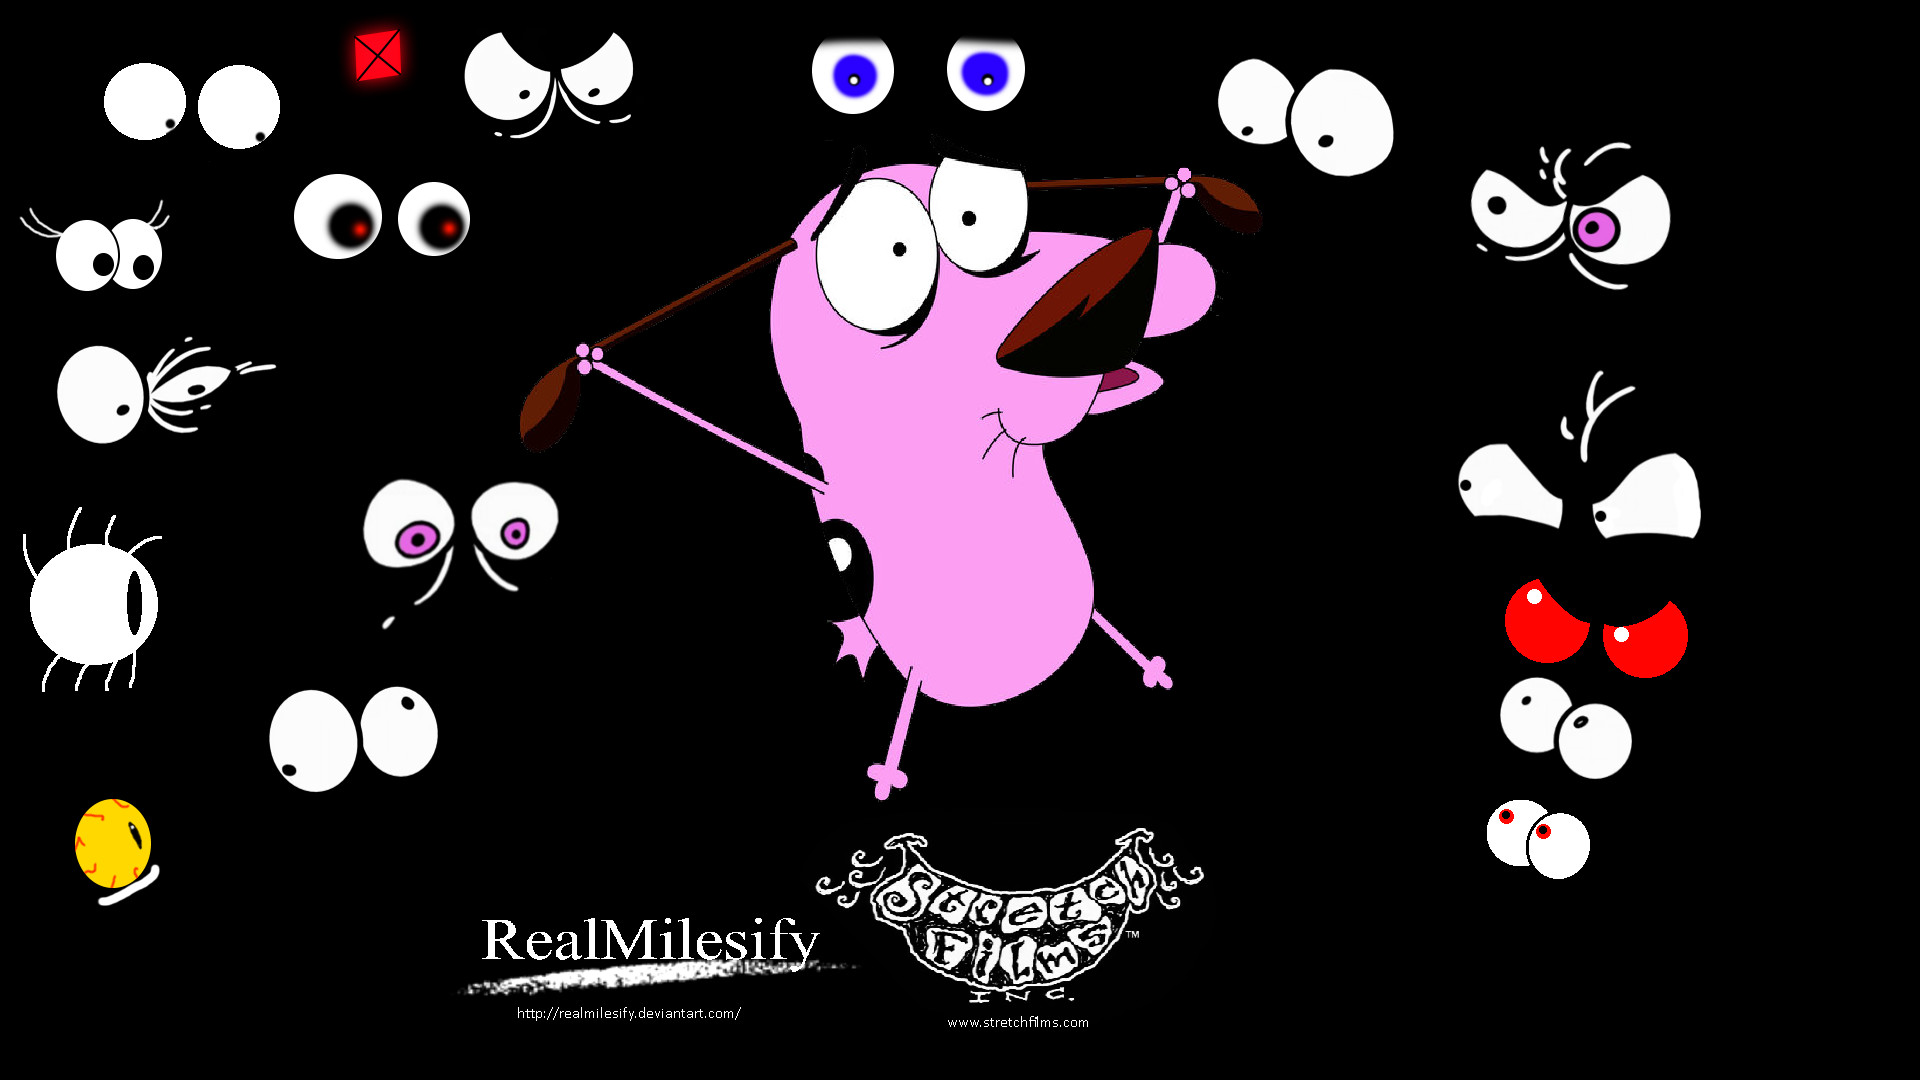 1920x1080 Courage the Cowardly Dog by RealMilesifyWorld64 Courage the Cowardly Dog by  RealMilesifyWorld64